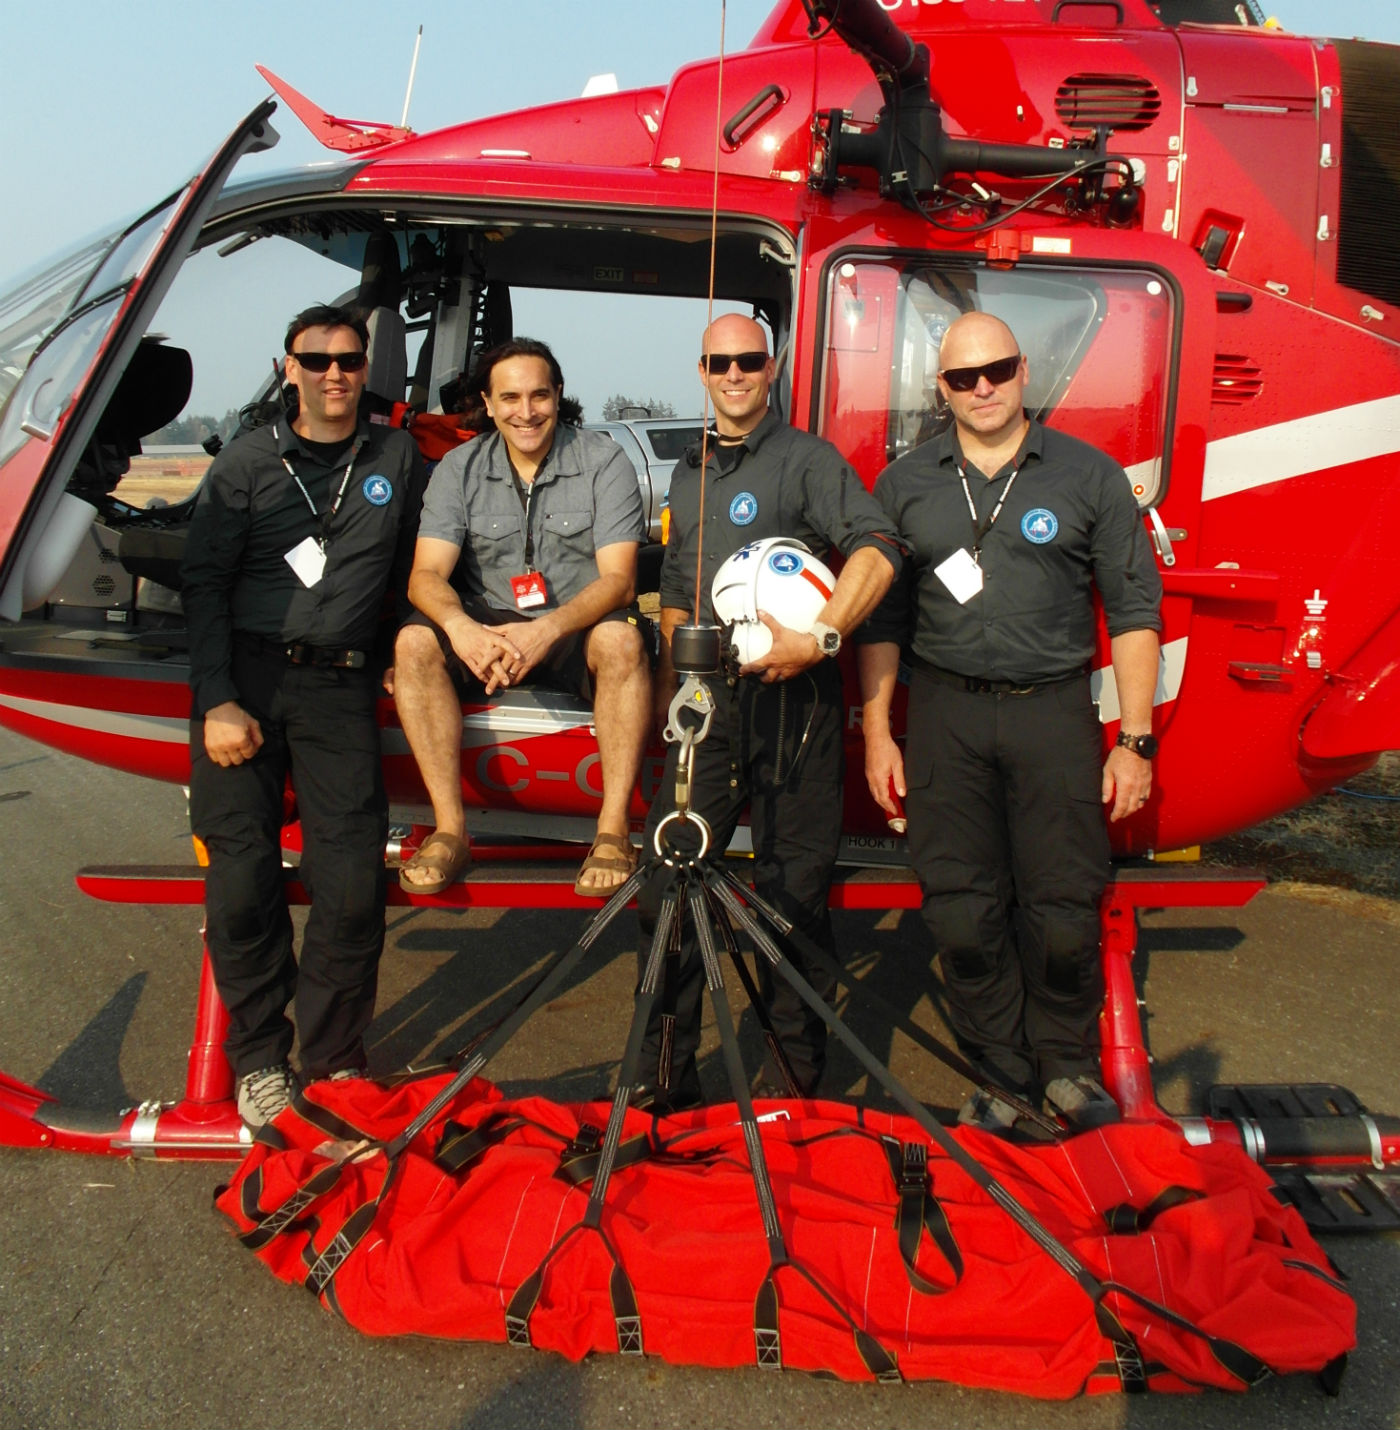 From left: Jordan Lawrence, Dr. Greg Haljan, Paul Windsor and Miles Randell were at the 2017 Abbotsford International Airshow to promote TEAAM, a new helicopter emergency medical service that will be based in Squamish, British Columbia. In collaboration with Blackcomb Helicopters, the organization aims to deliver advanced medical care to patients in remote sites that are beyond the mandate of the province's current air medical providers. Lisa Gordon Photo